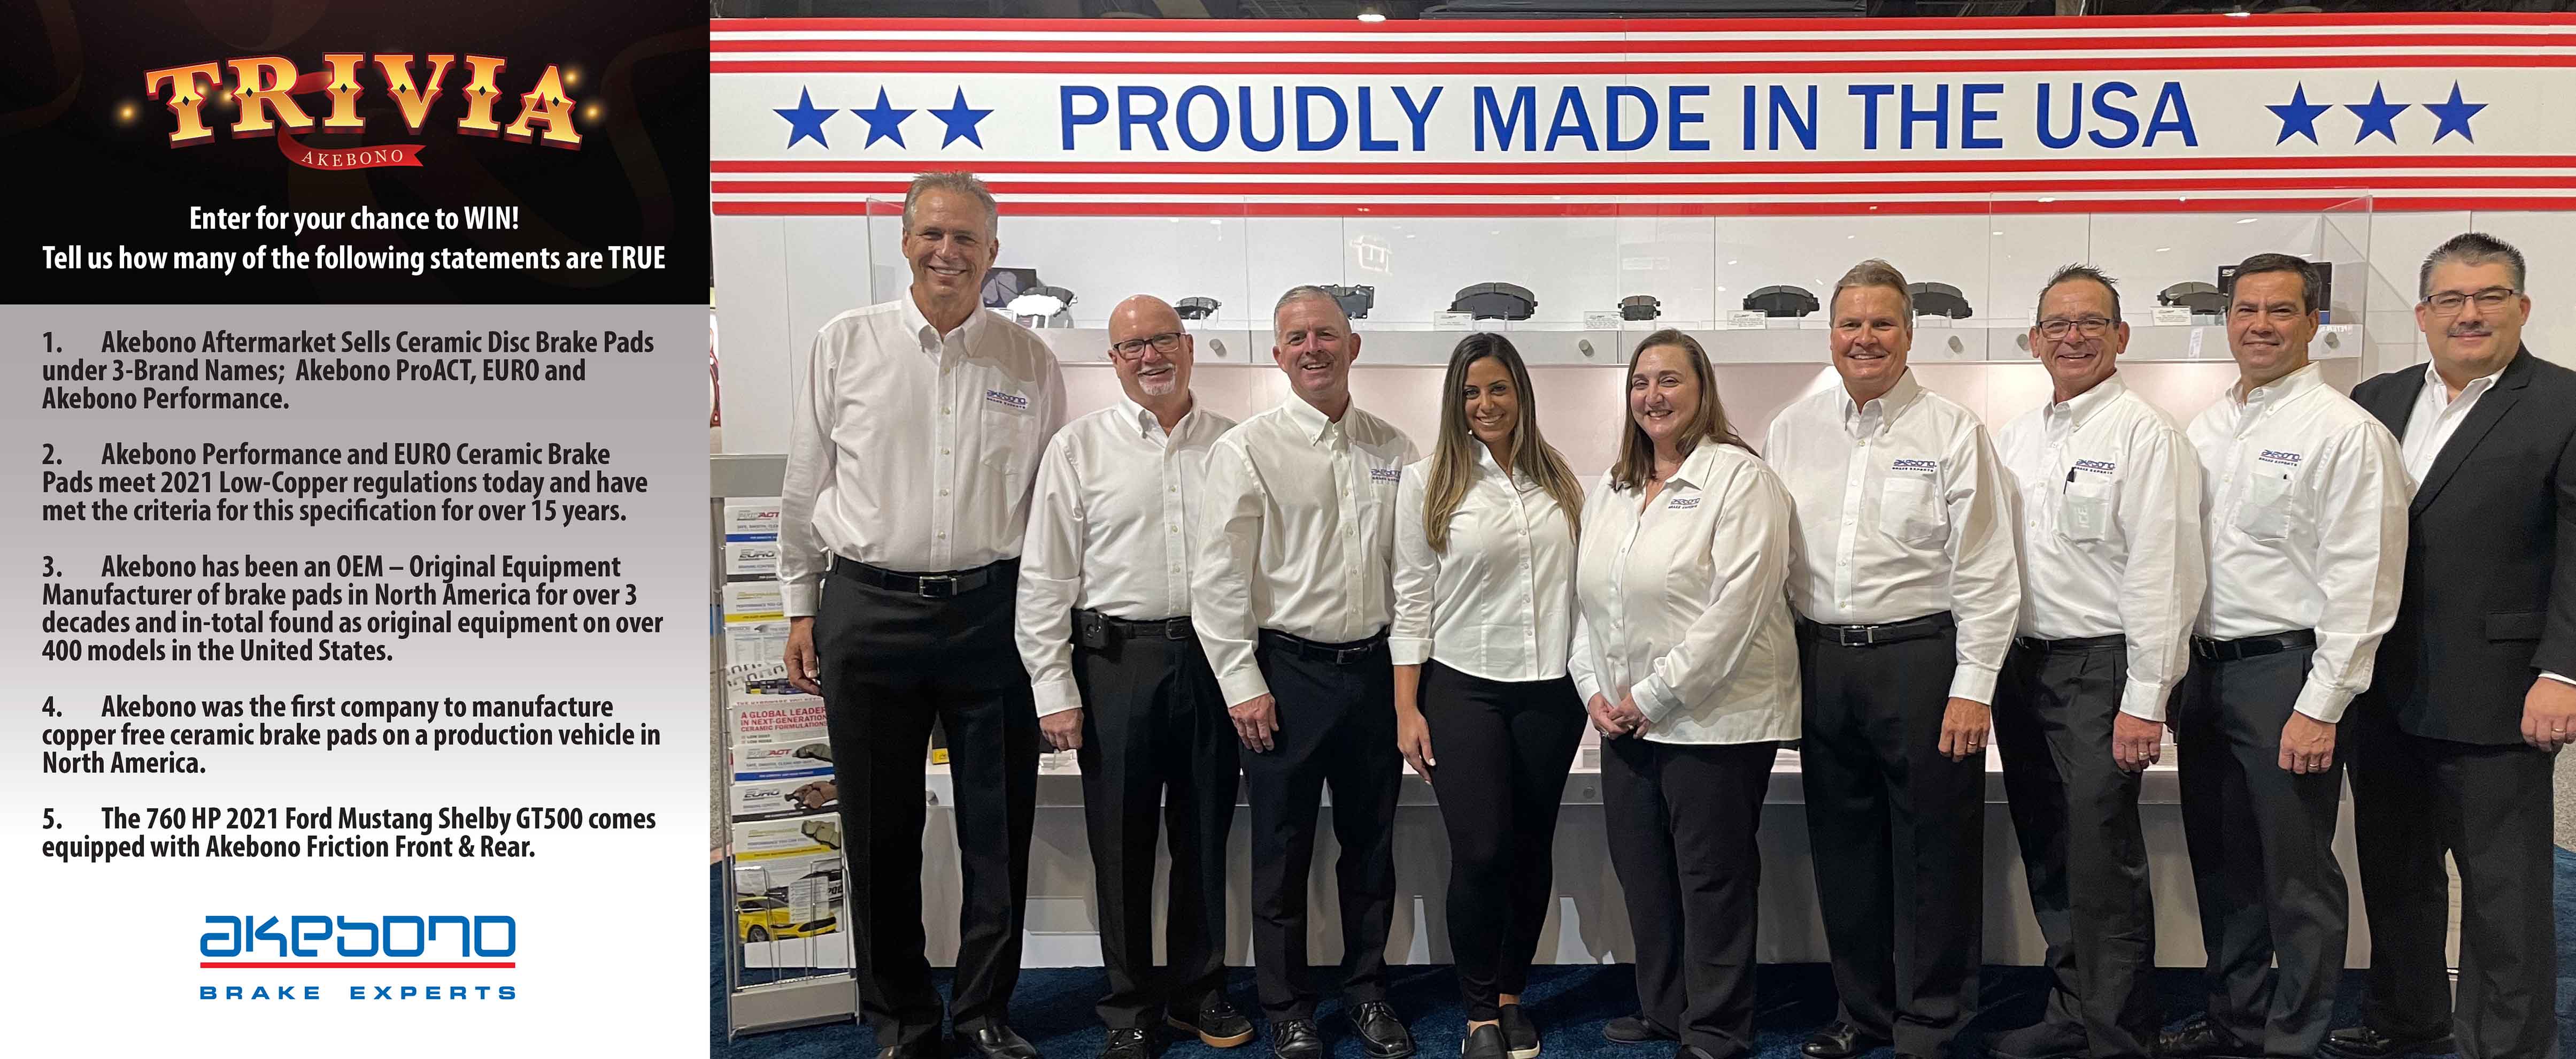 Winners Of Akebono’s Trivia Contest At Aapex 2021 Announced